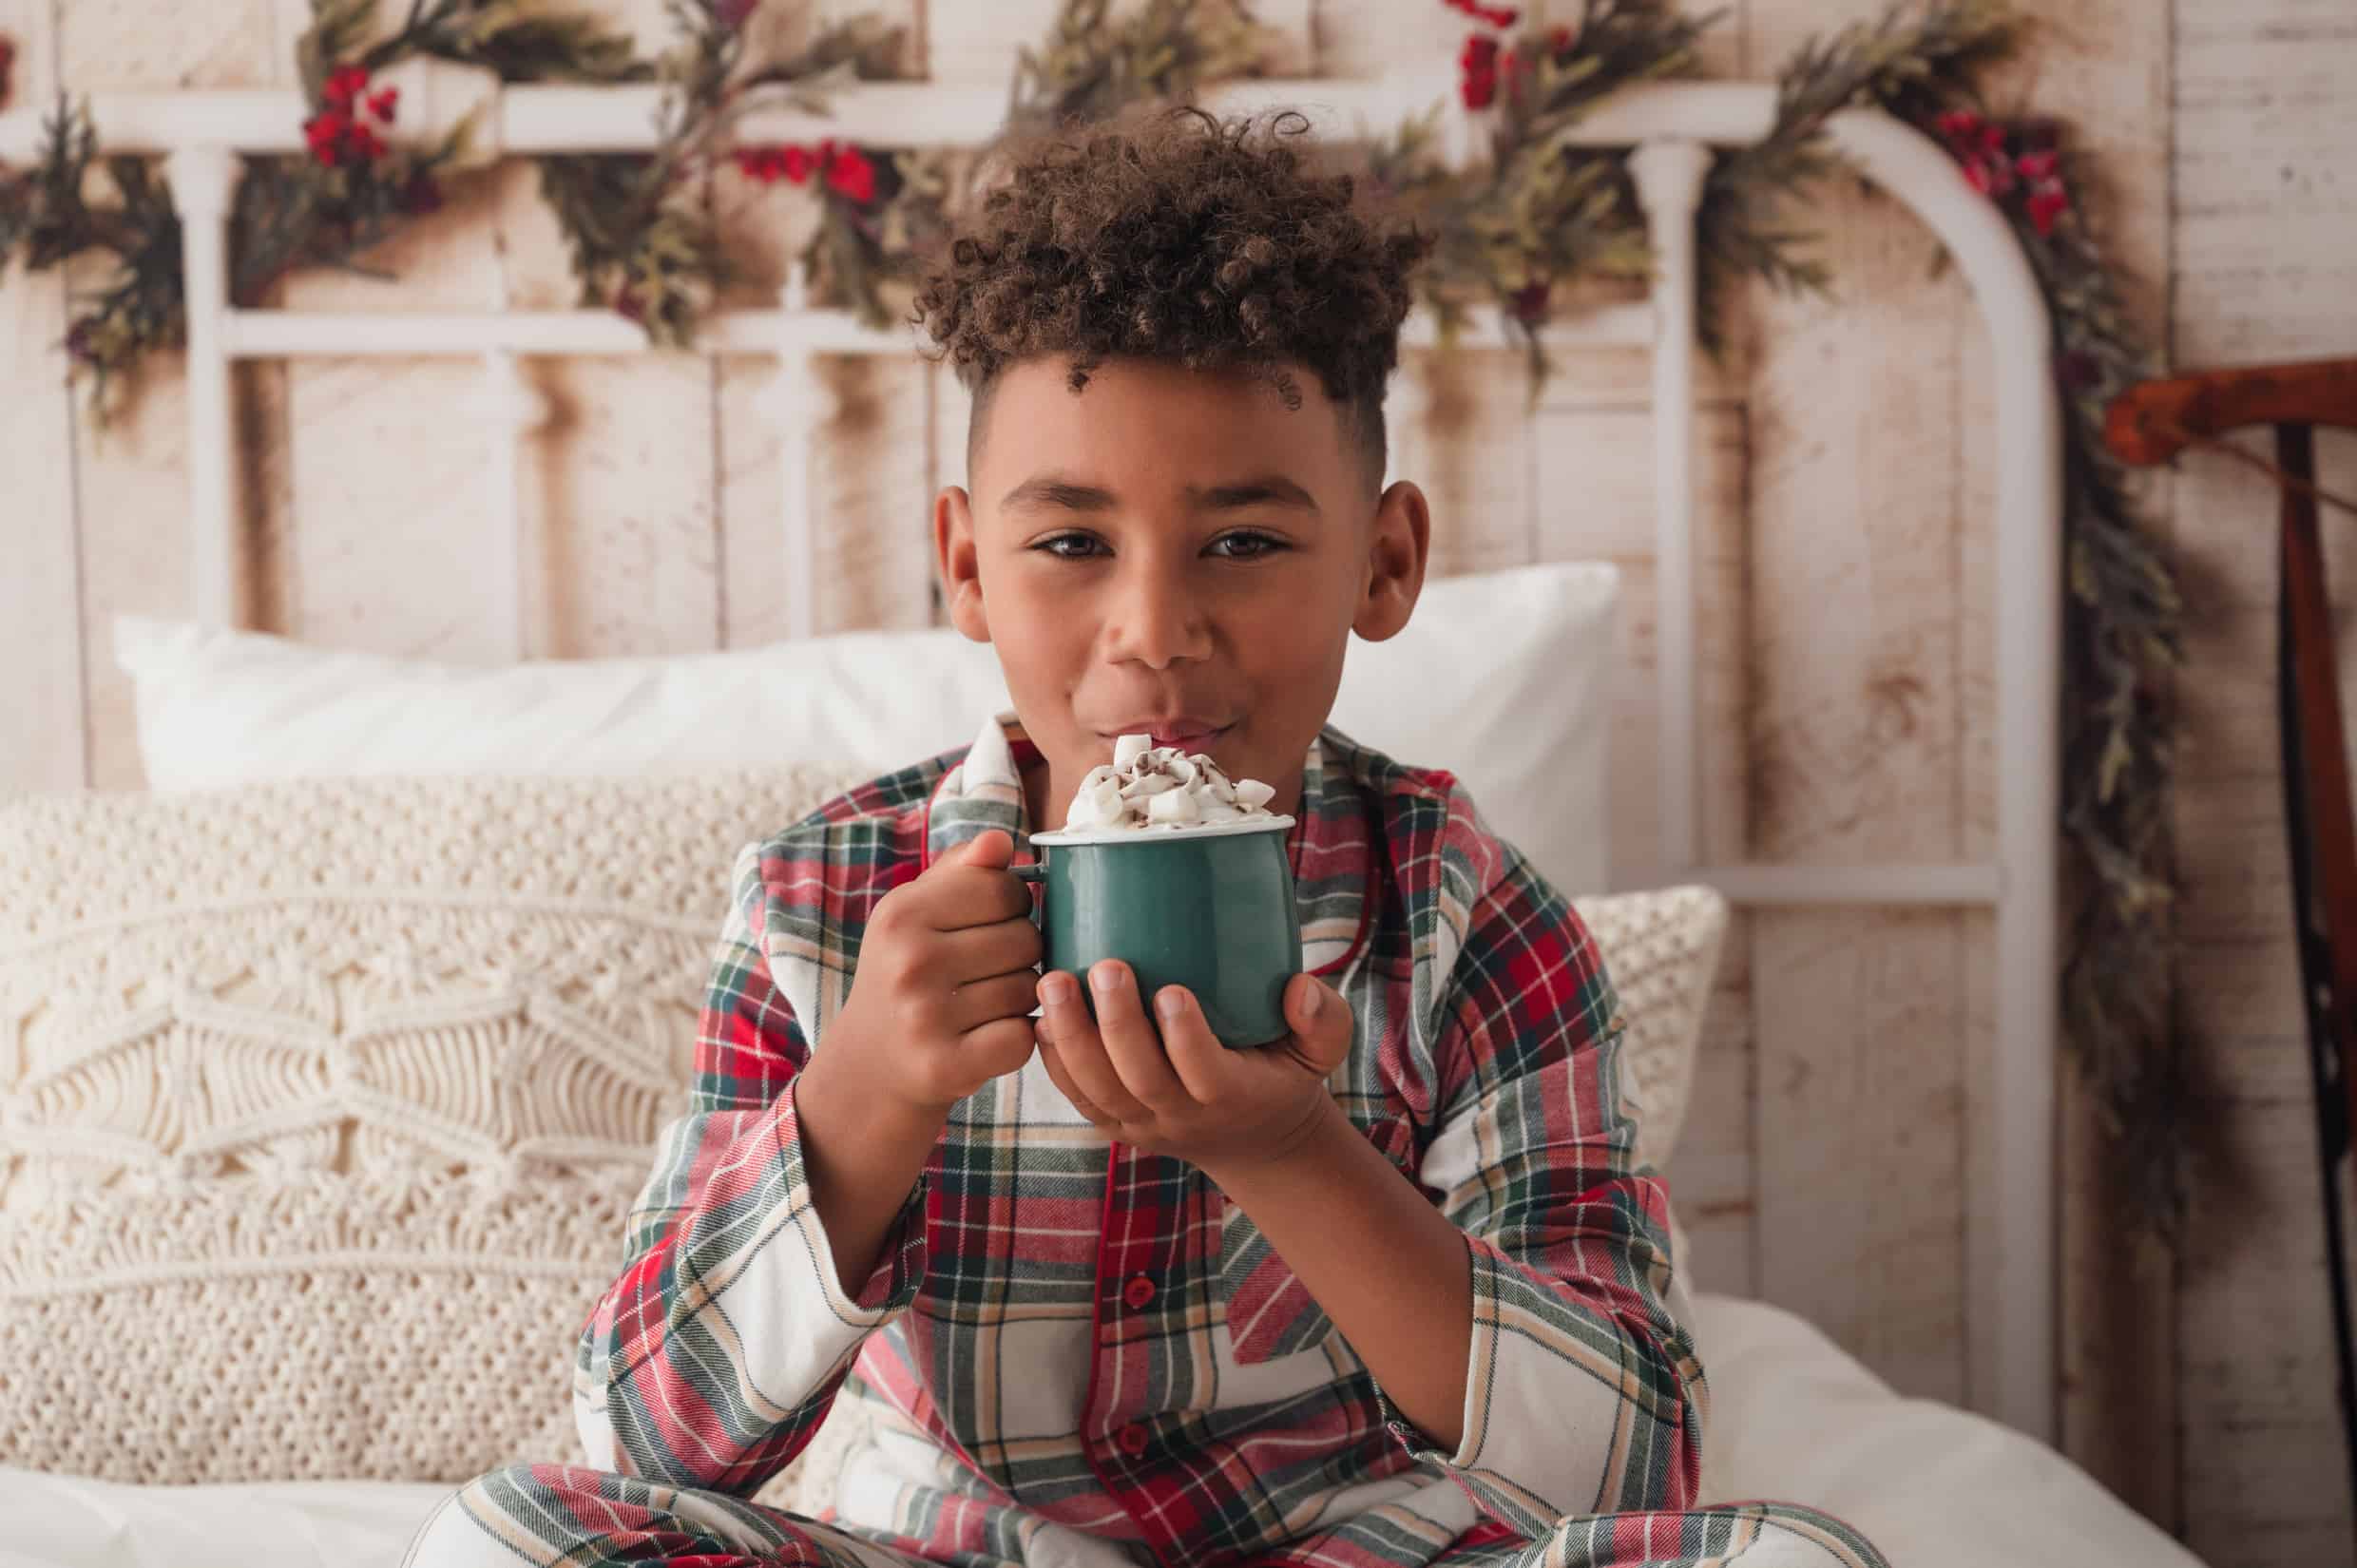 Christmas photo of a boy drinking hot chocolate sitting on a bed in tartan pyjamas